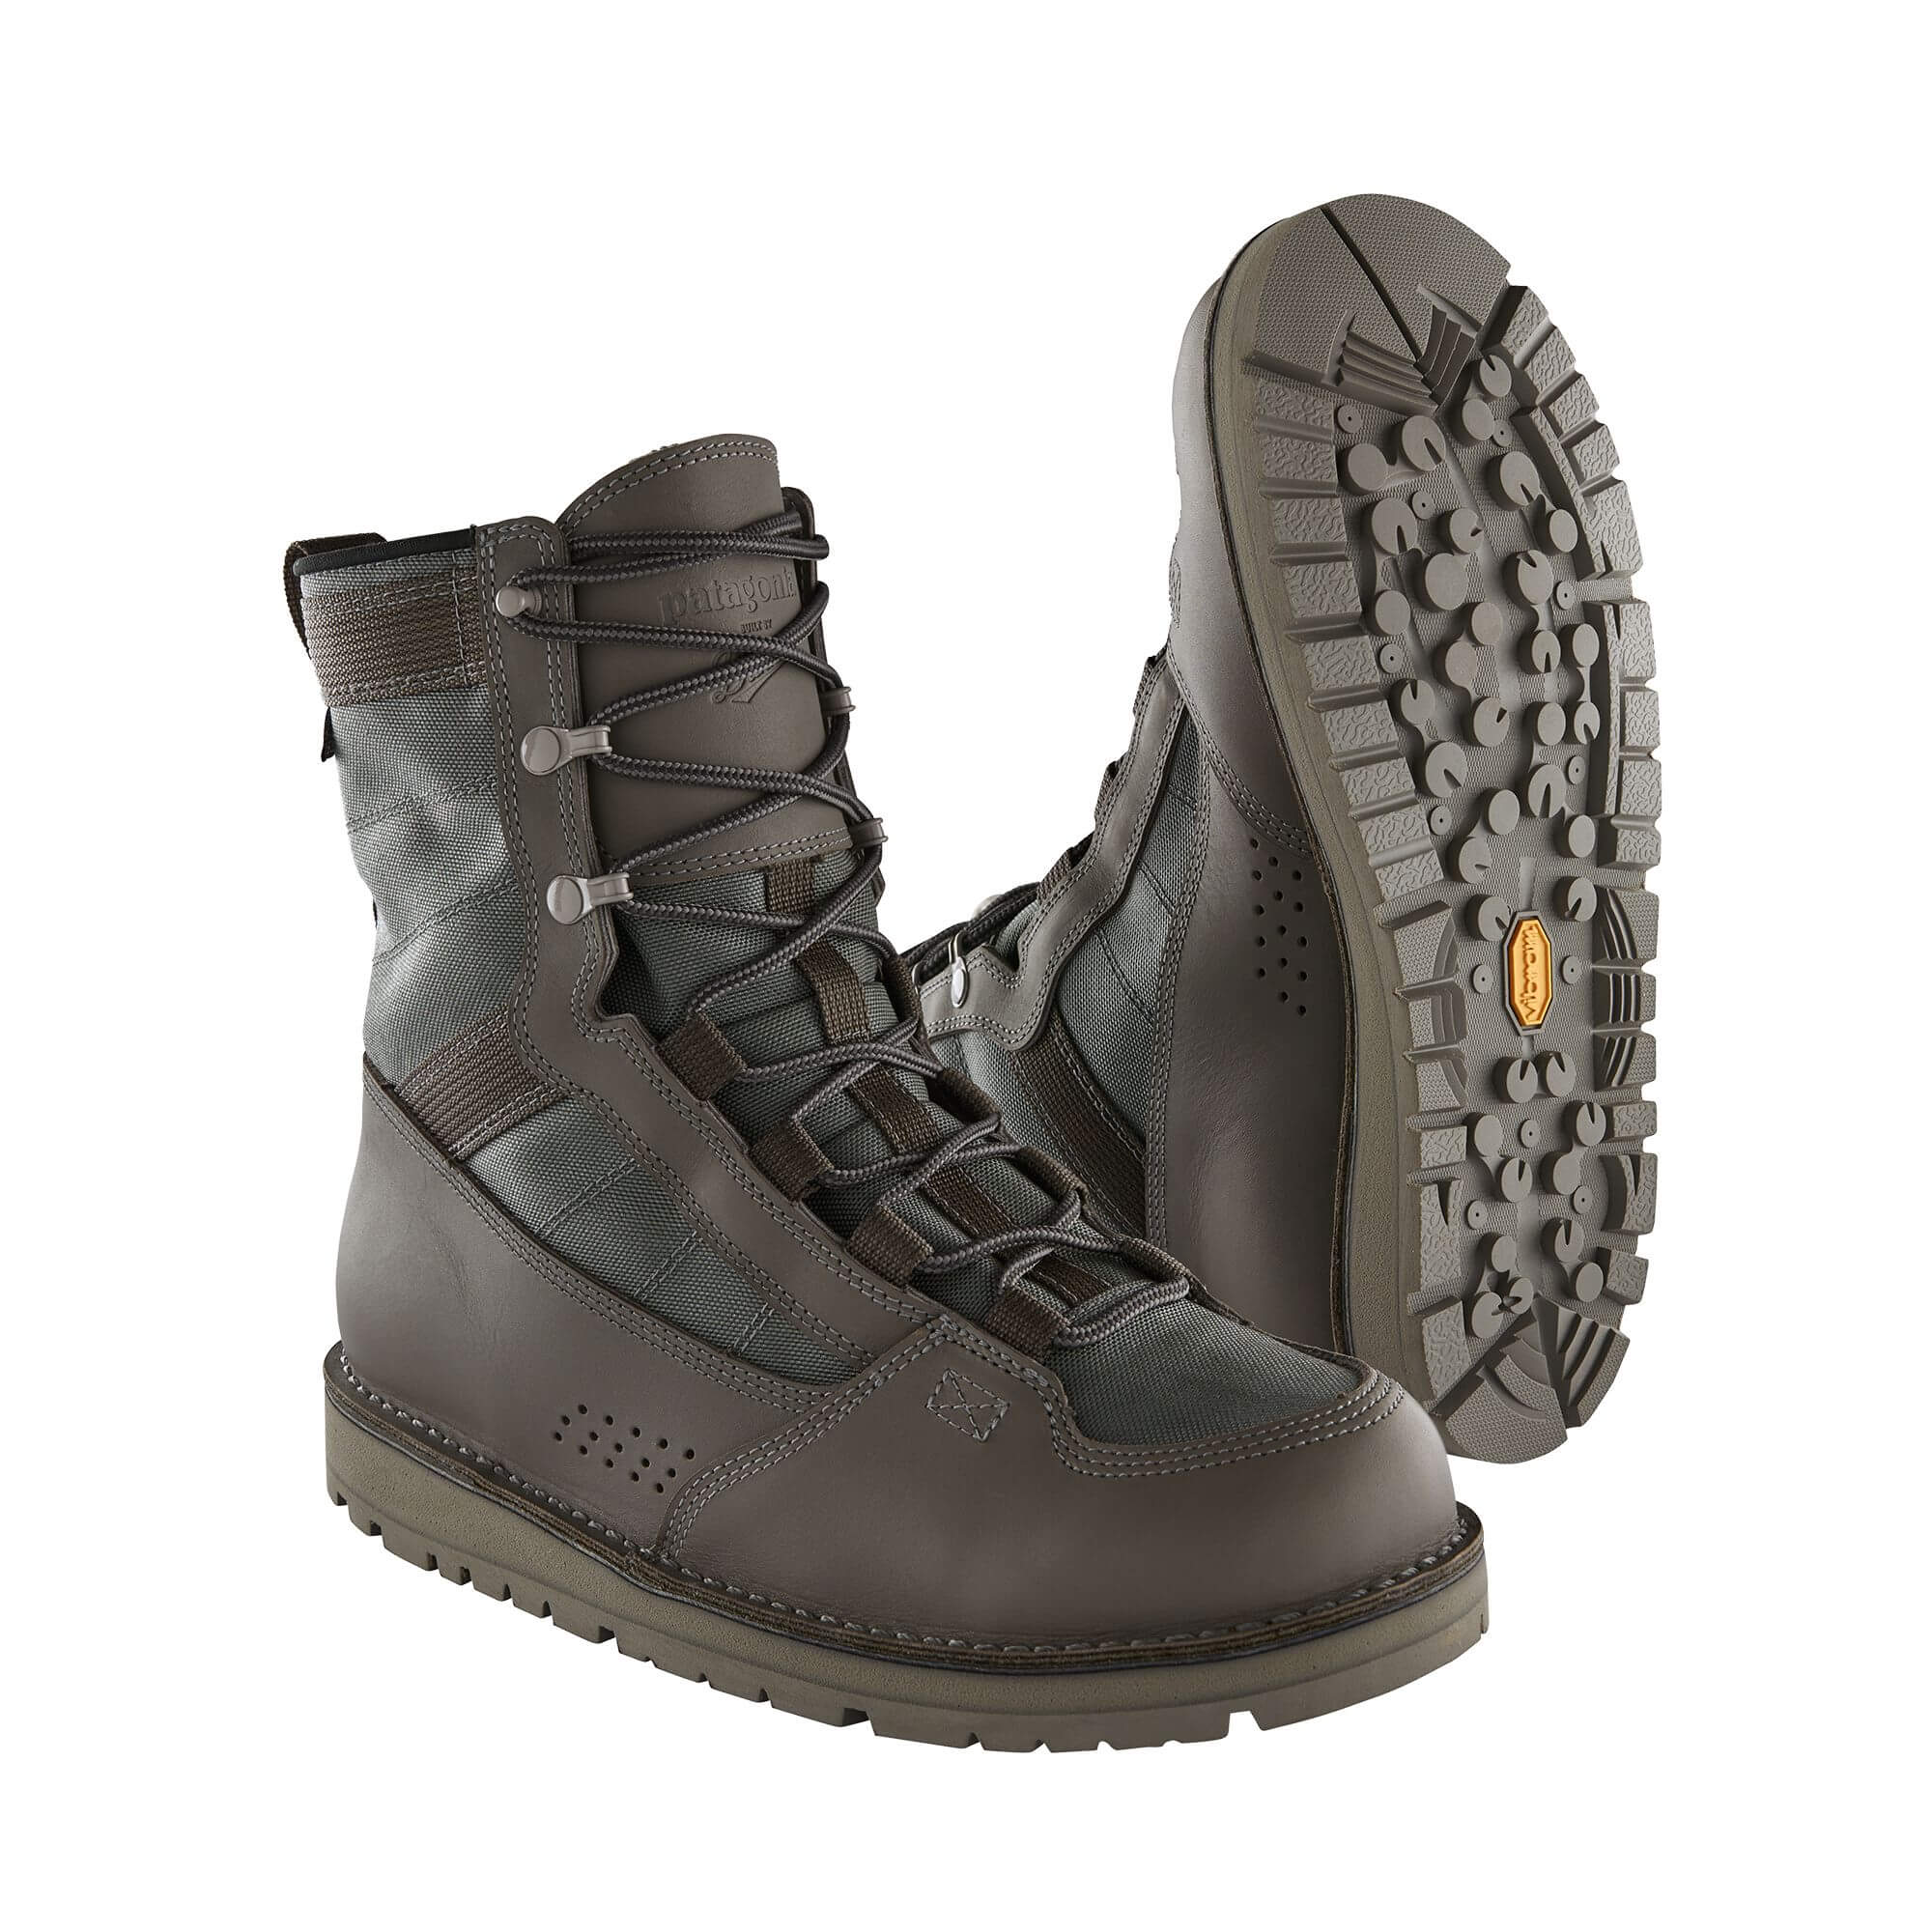 Patagonia River Salt Wading Boot (by Danner) - 10